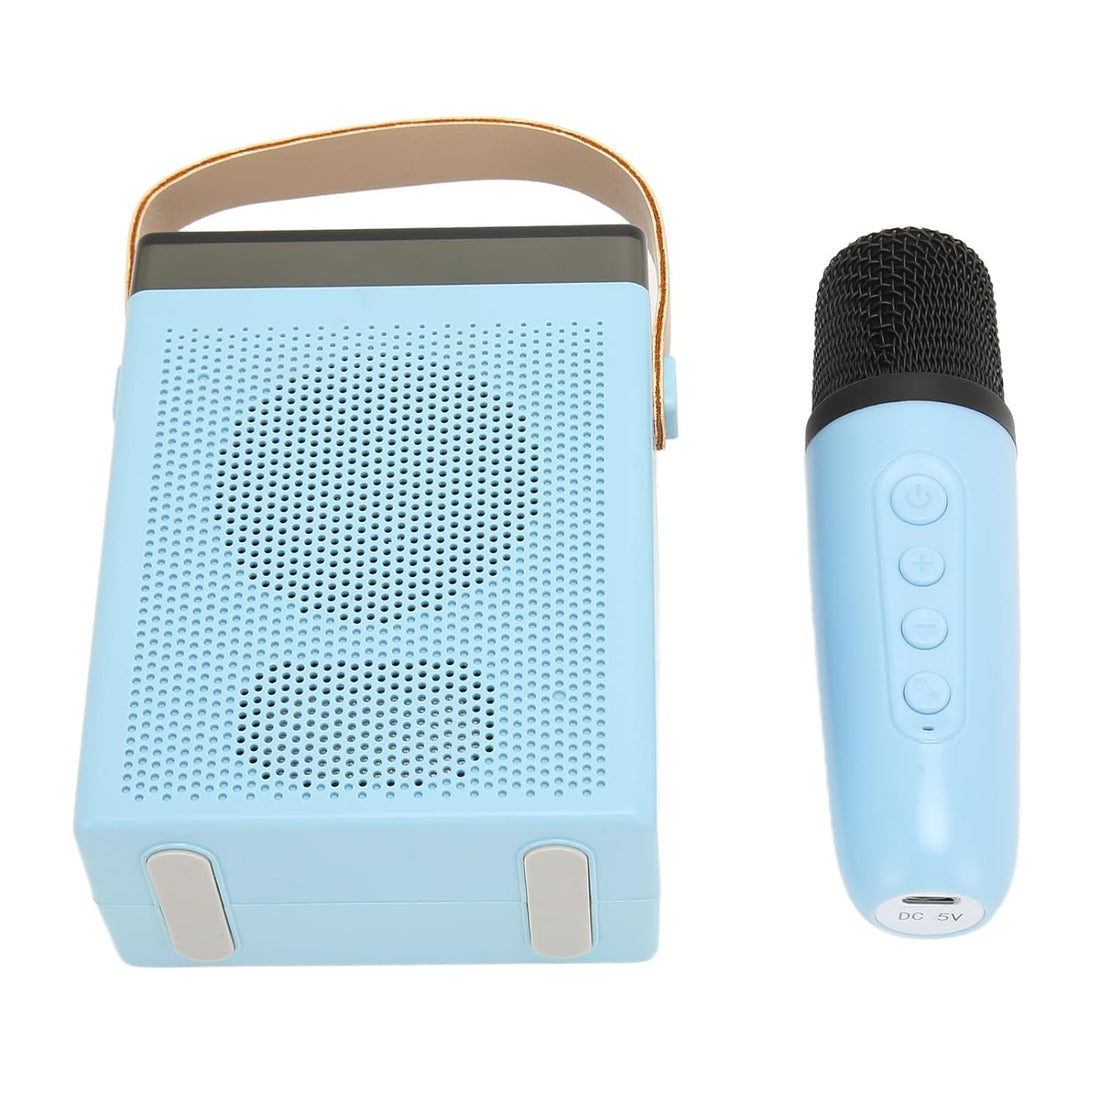 DAUERHAFT Portable Speaker, Karaoke Machine with Built-in Reverb, RGB Lighting, Long Battery Life with 2 Wireless Microphones for Kids Party (Blue)